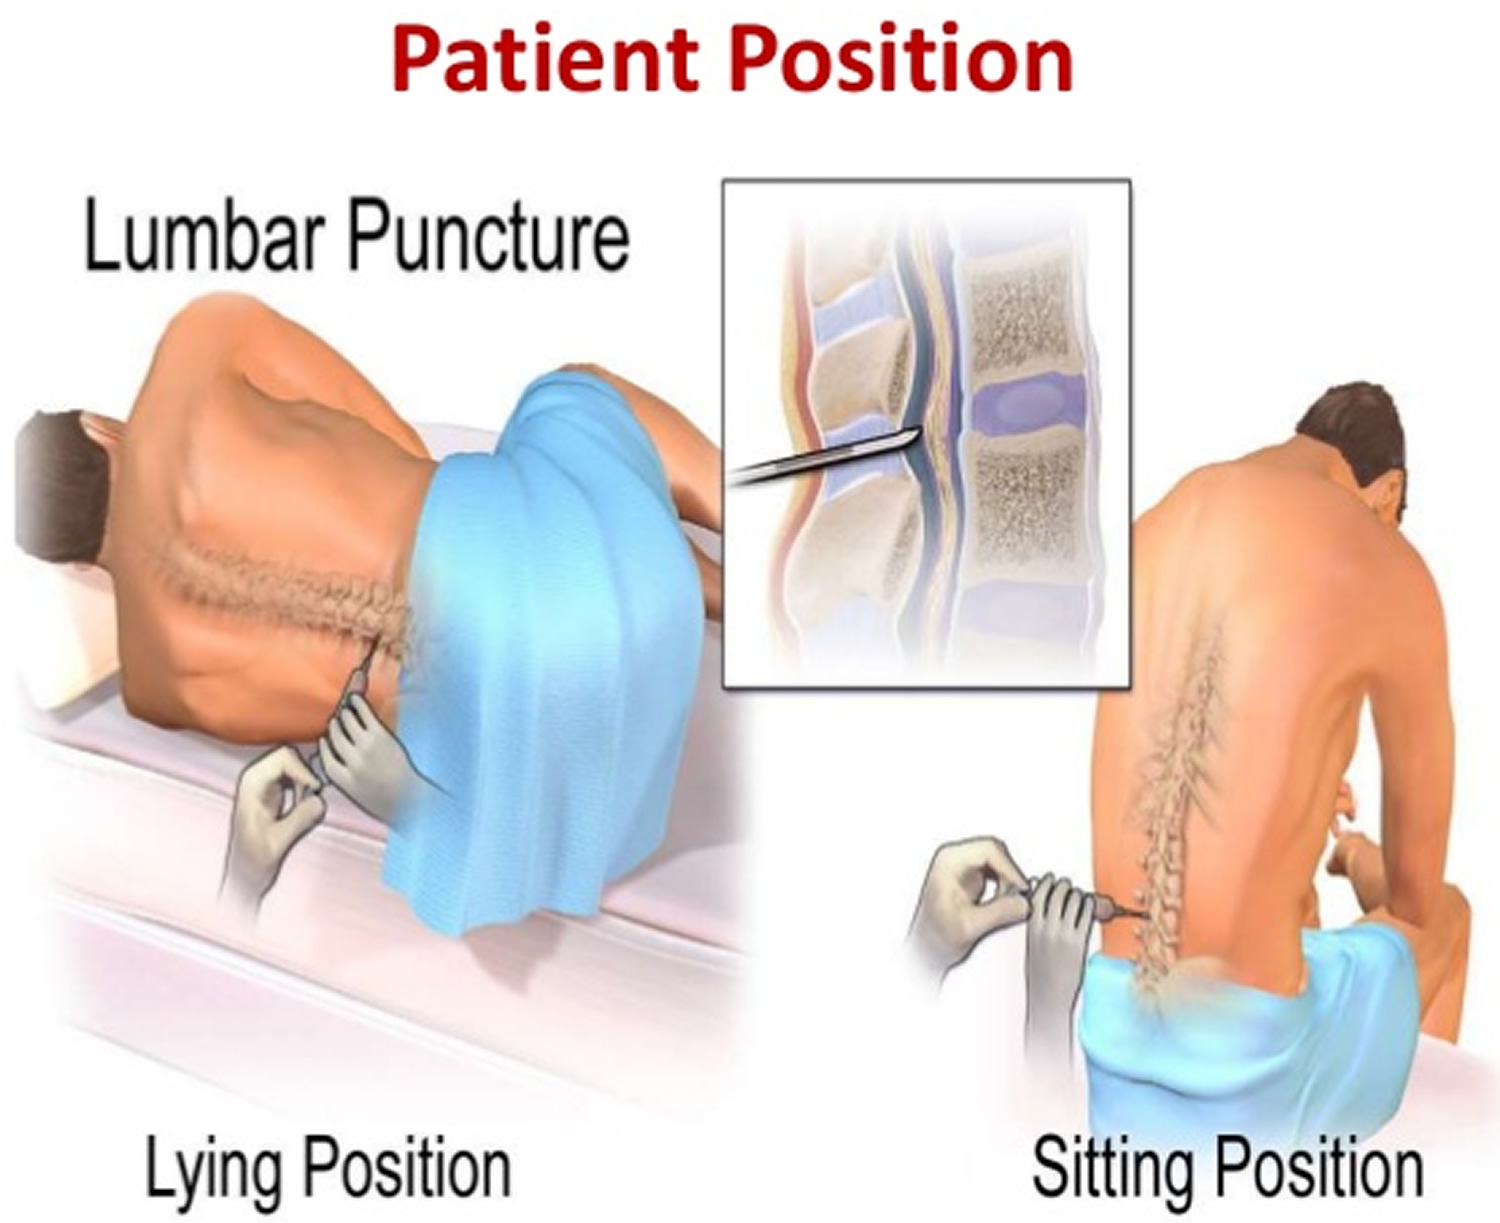 Lumbar Puncture Procedure Position & Lumbar Puncture Side Effects